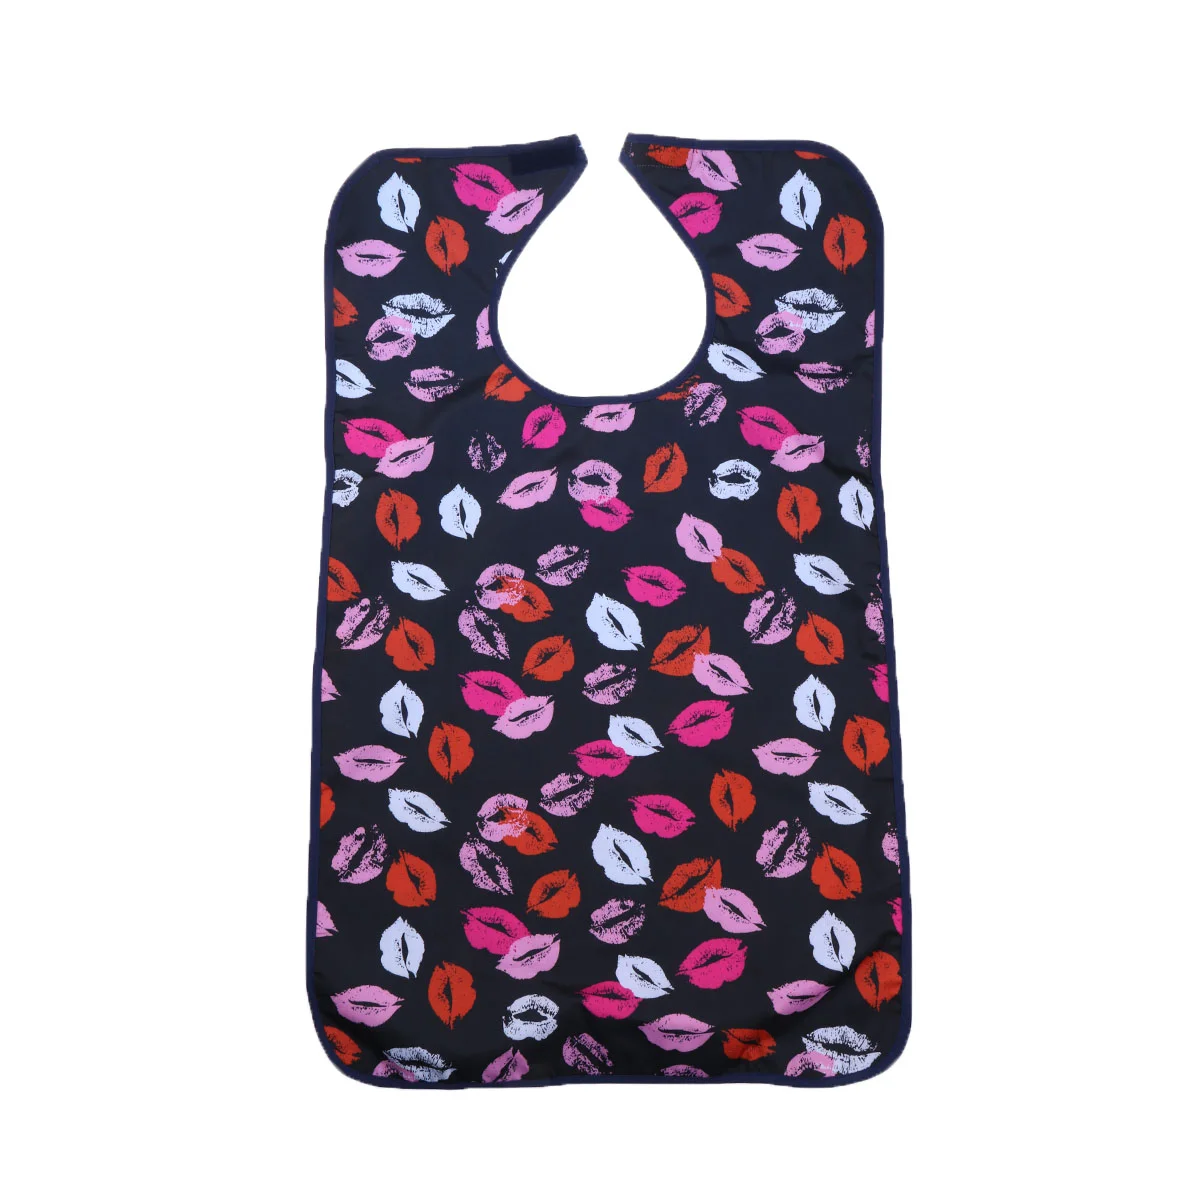 

Bibs for Eating Washable, Waterproof Clothing Protector for Seniors for Eating at Mealtime Aid Apron with Crumb Catcher for